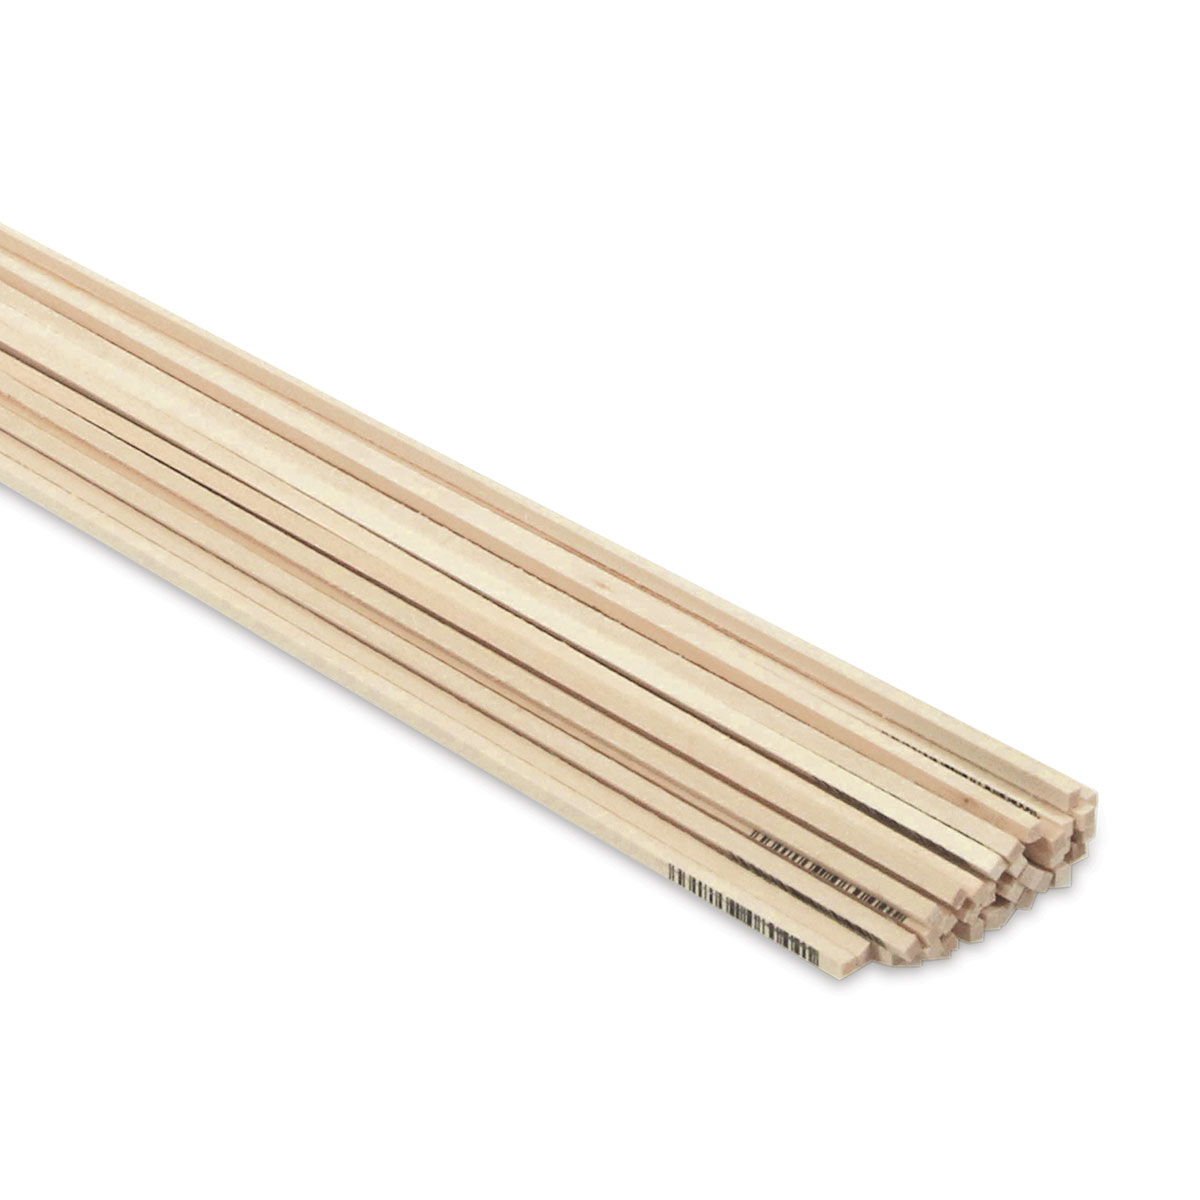 Midwest Products Basswood Strips - 36 Pieces, 1/8